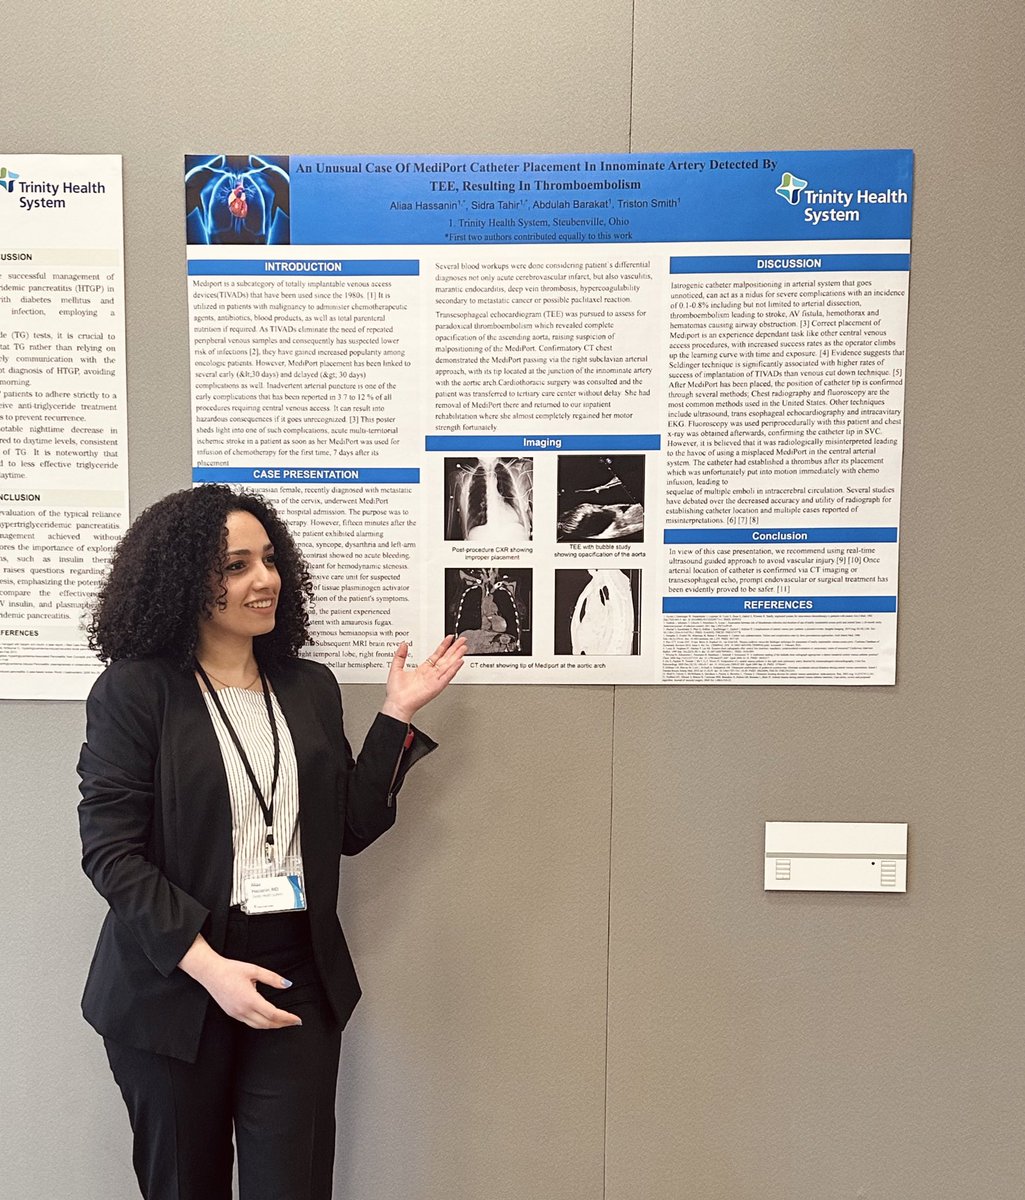 Thrilled to showcase my poster at the CommonSpirit Health 2nd Annual Cardiovascular Symposium! Grateful for the opportunity to share insights and contribute to advancing cardiovascular care. #Cardiology #Research #AmericanHeartMonth #HealthcareInnovation